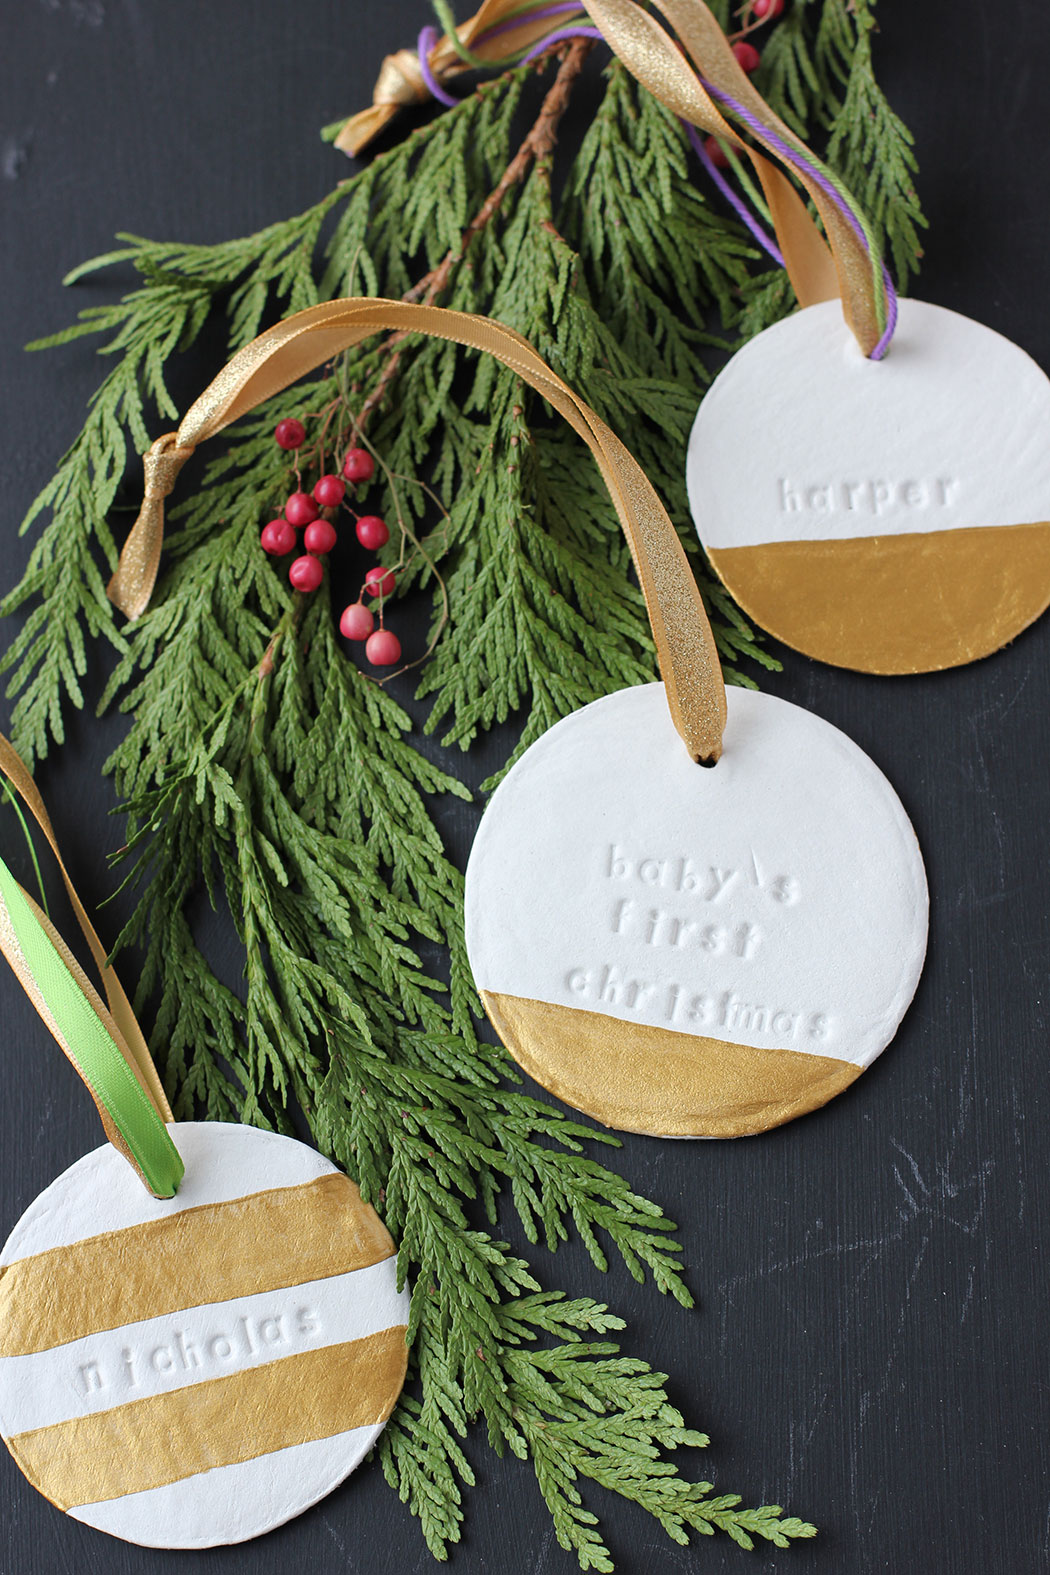 DIY personalized clay ornament